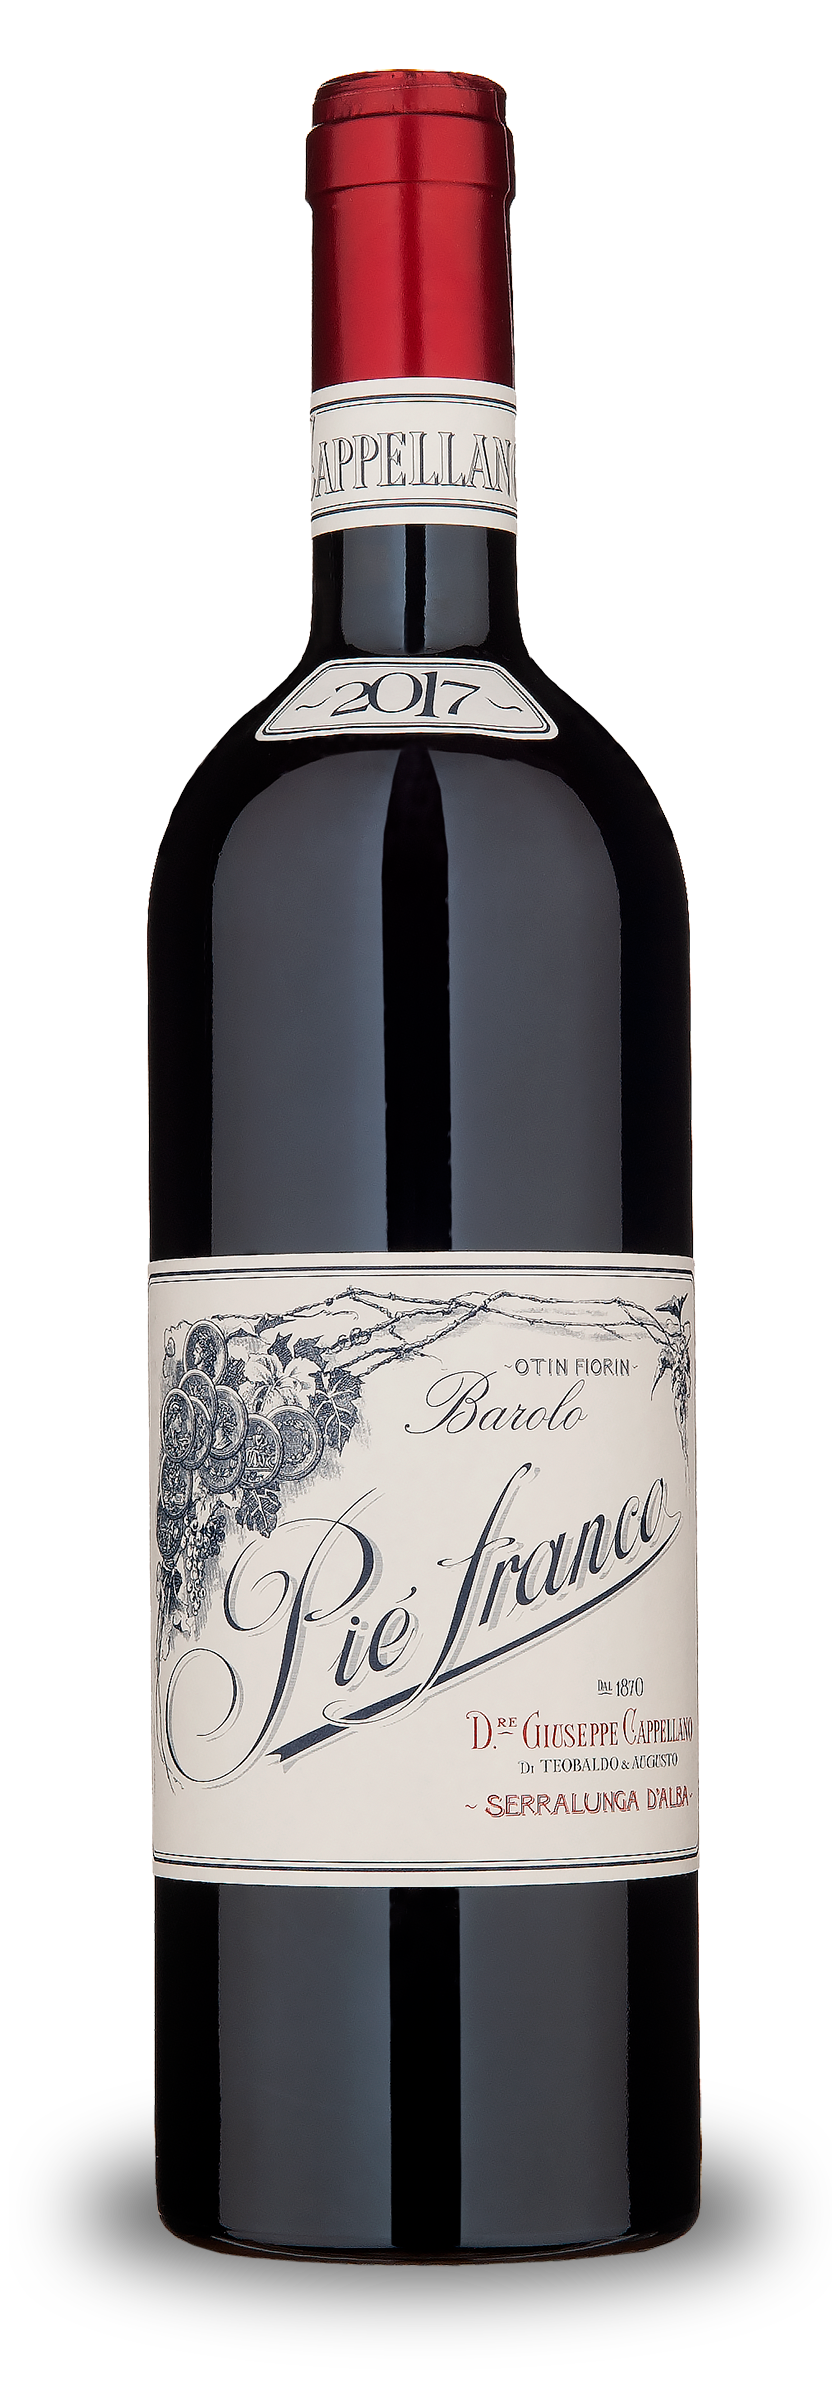 Barolo Piè Franco 2011 - ONLY ON PRE-ALLOCATION Contact us for further information (indulge@flemmings.wine)